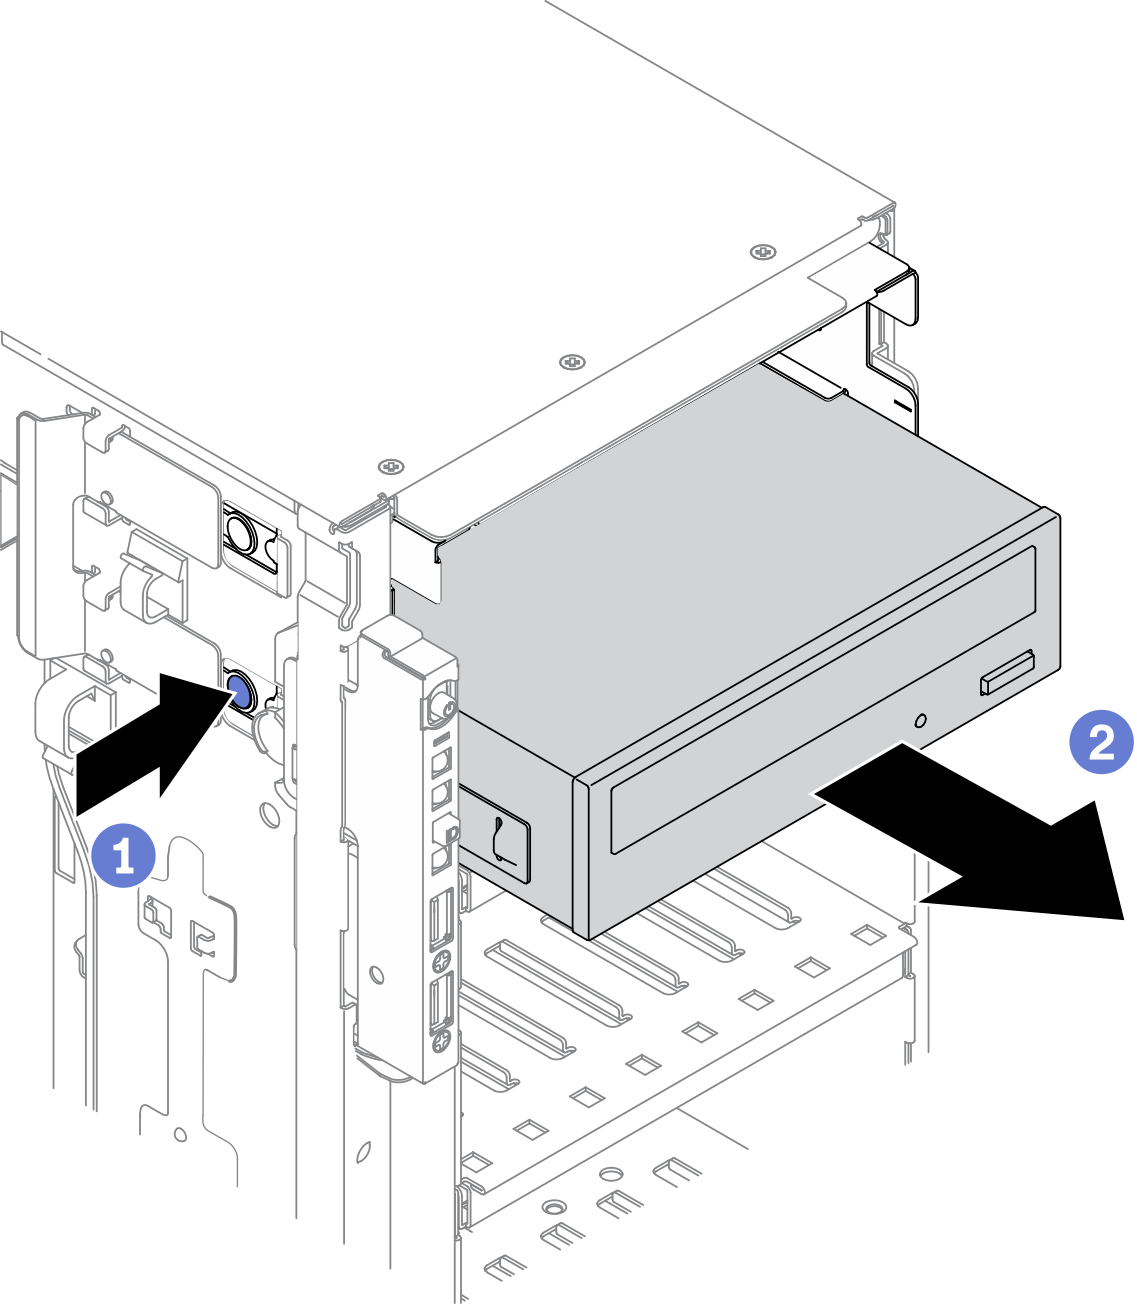 Optical drive removal